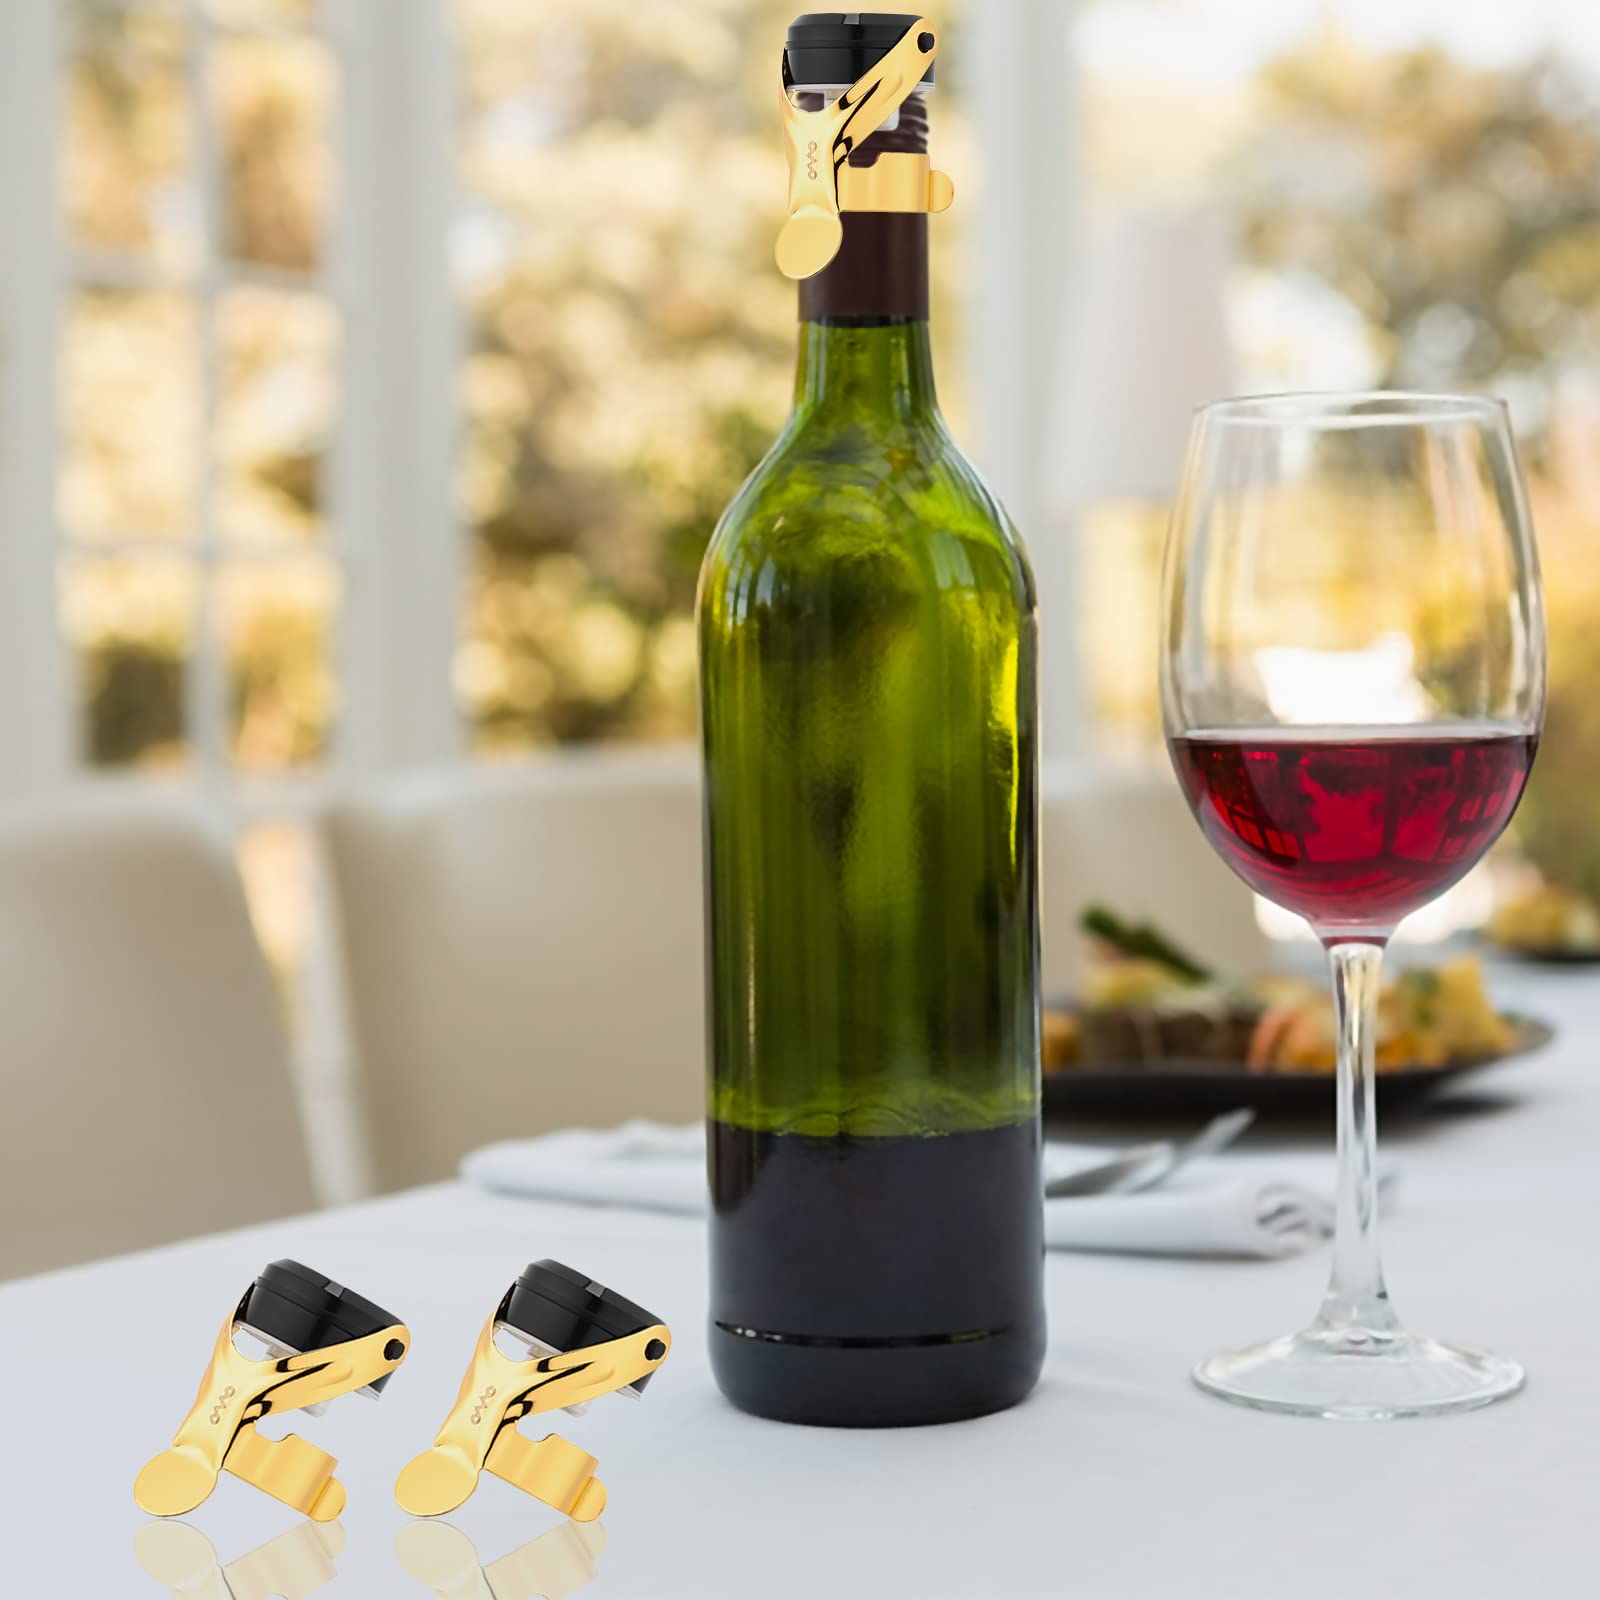 OWO Wine stoppers Stainless Steel Wine Saver Plug with Silicone Wine Saver for all Standard Bottle Necks Leak proof Keep Fresh （Gold, 2 Pack）